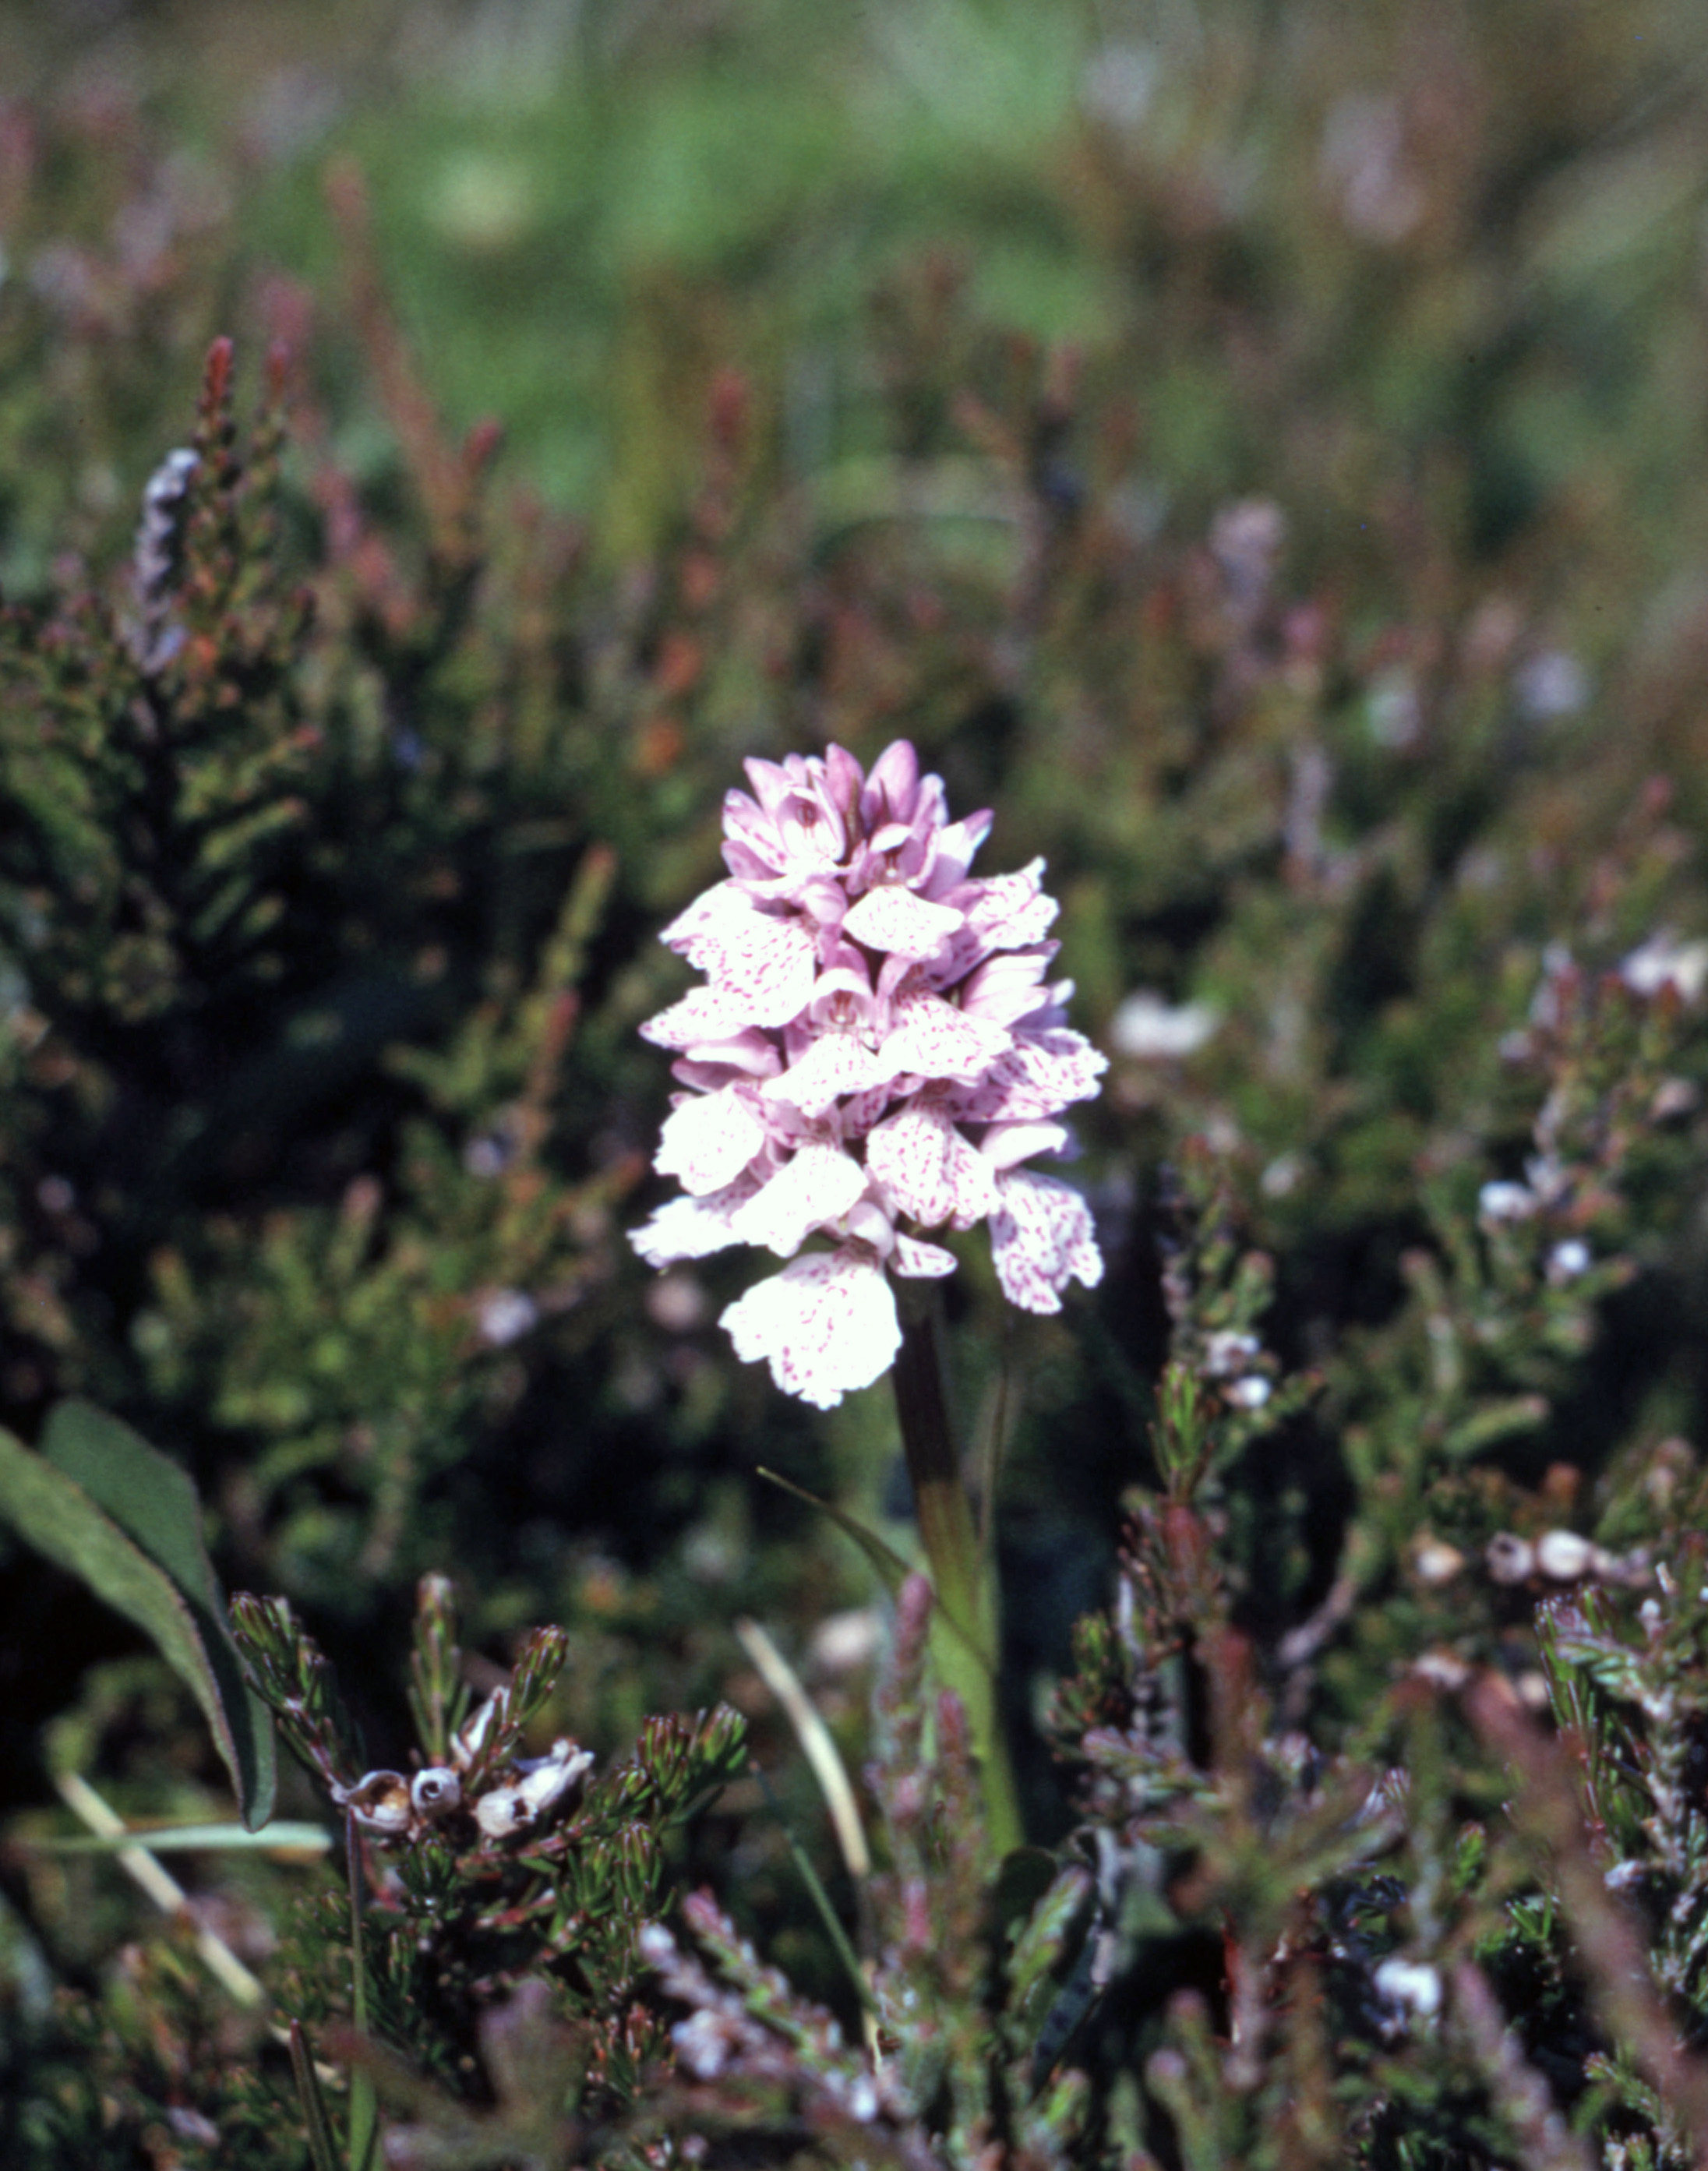 7505235 May 1975 - An orchid by the footpath.